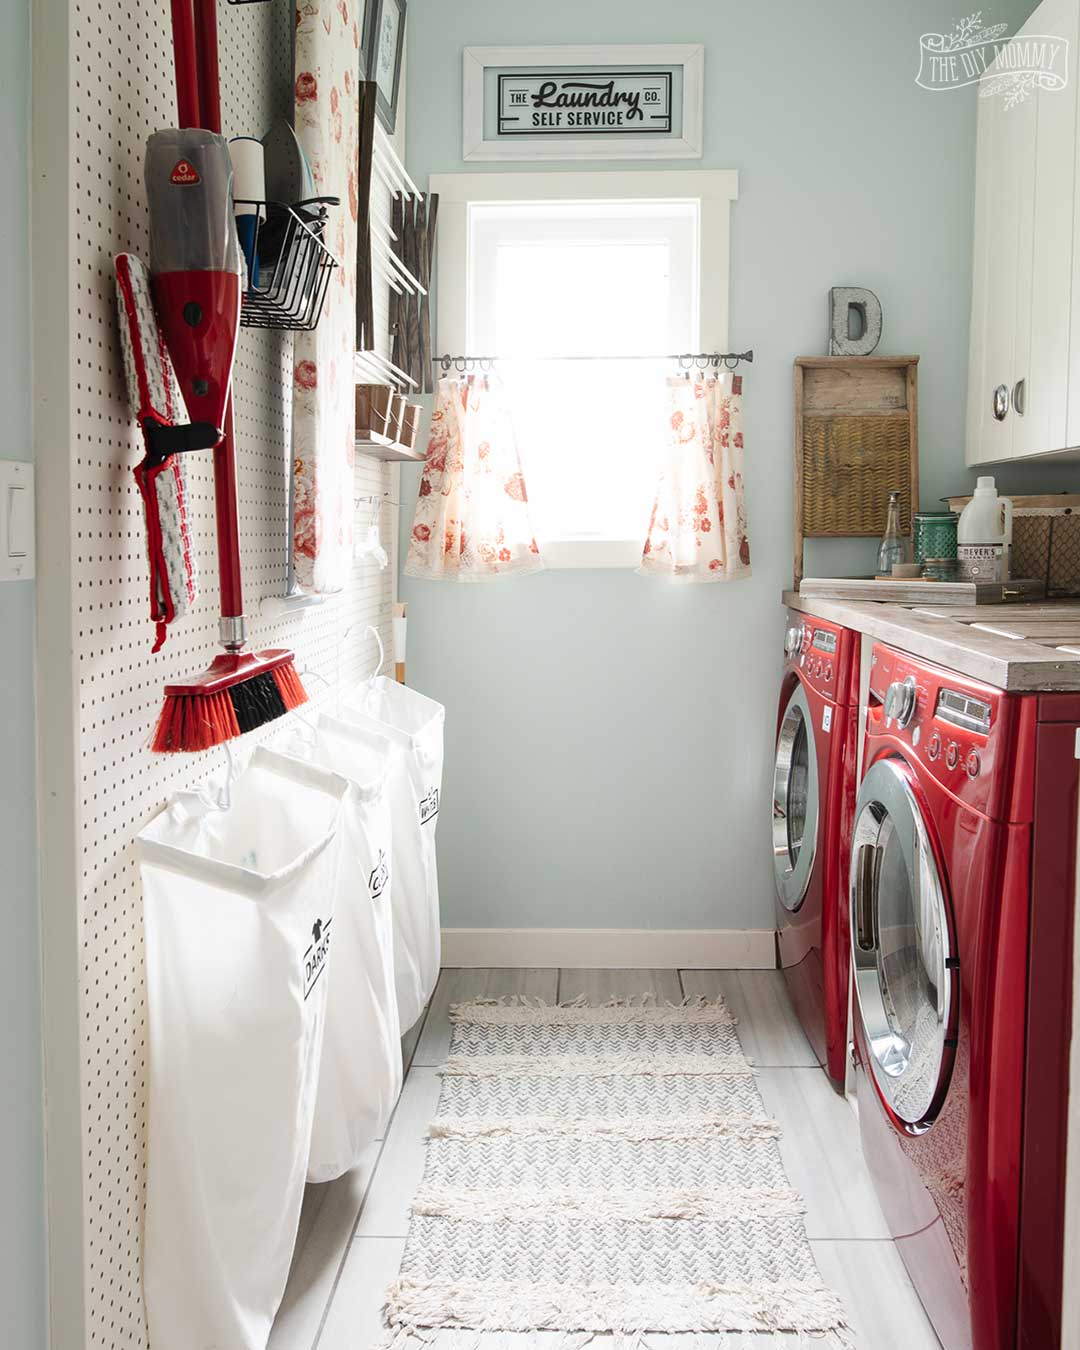 15 Small Laundry Room Makeover Ideas that are Pretty, Practical and  Eco-Friendly